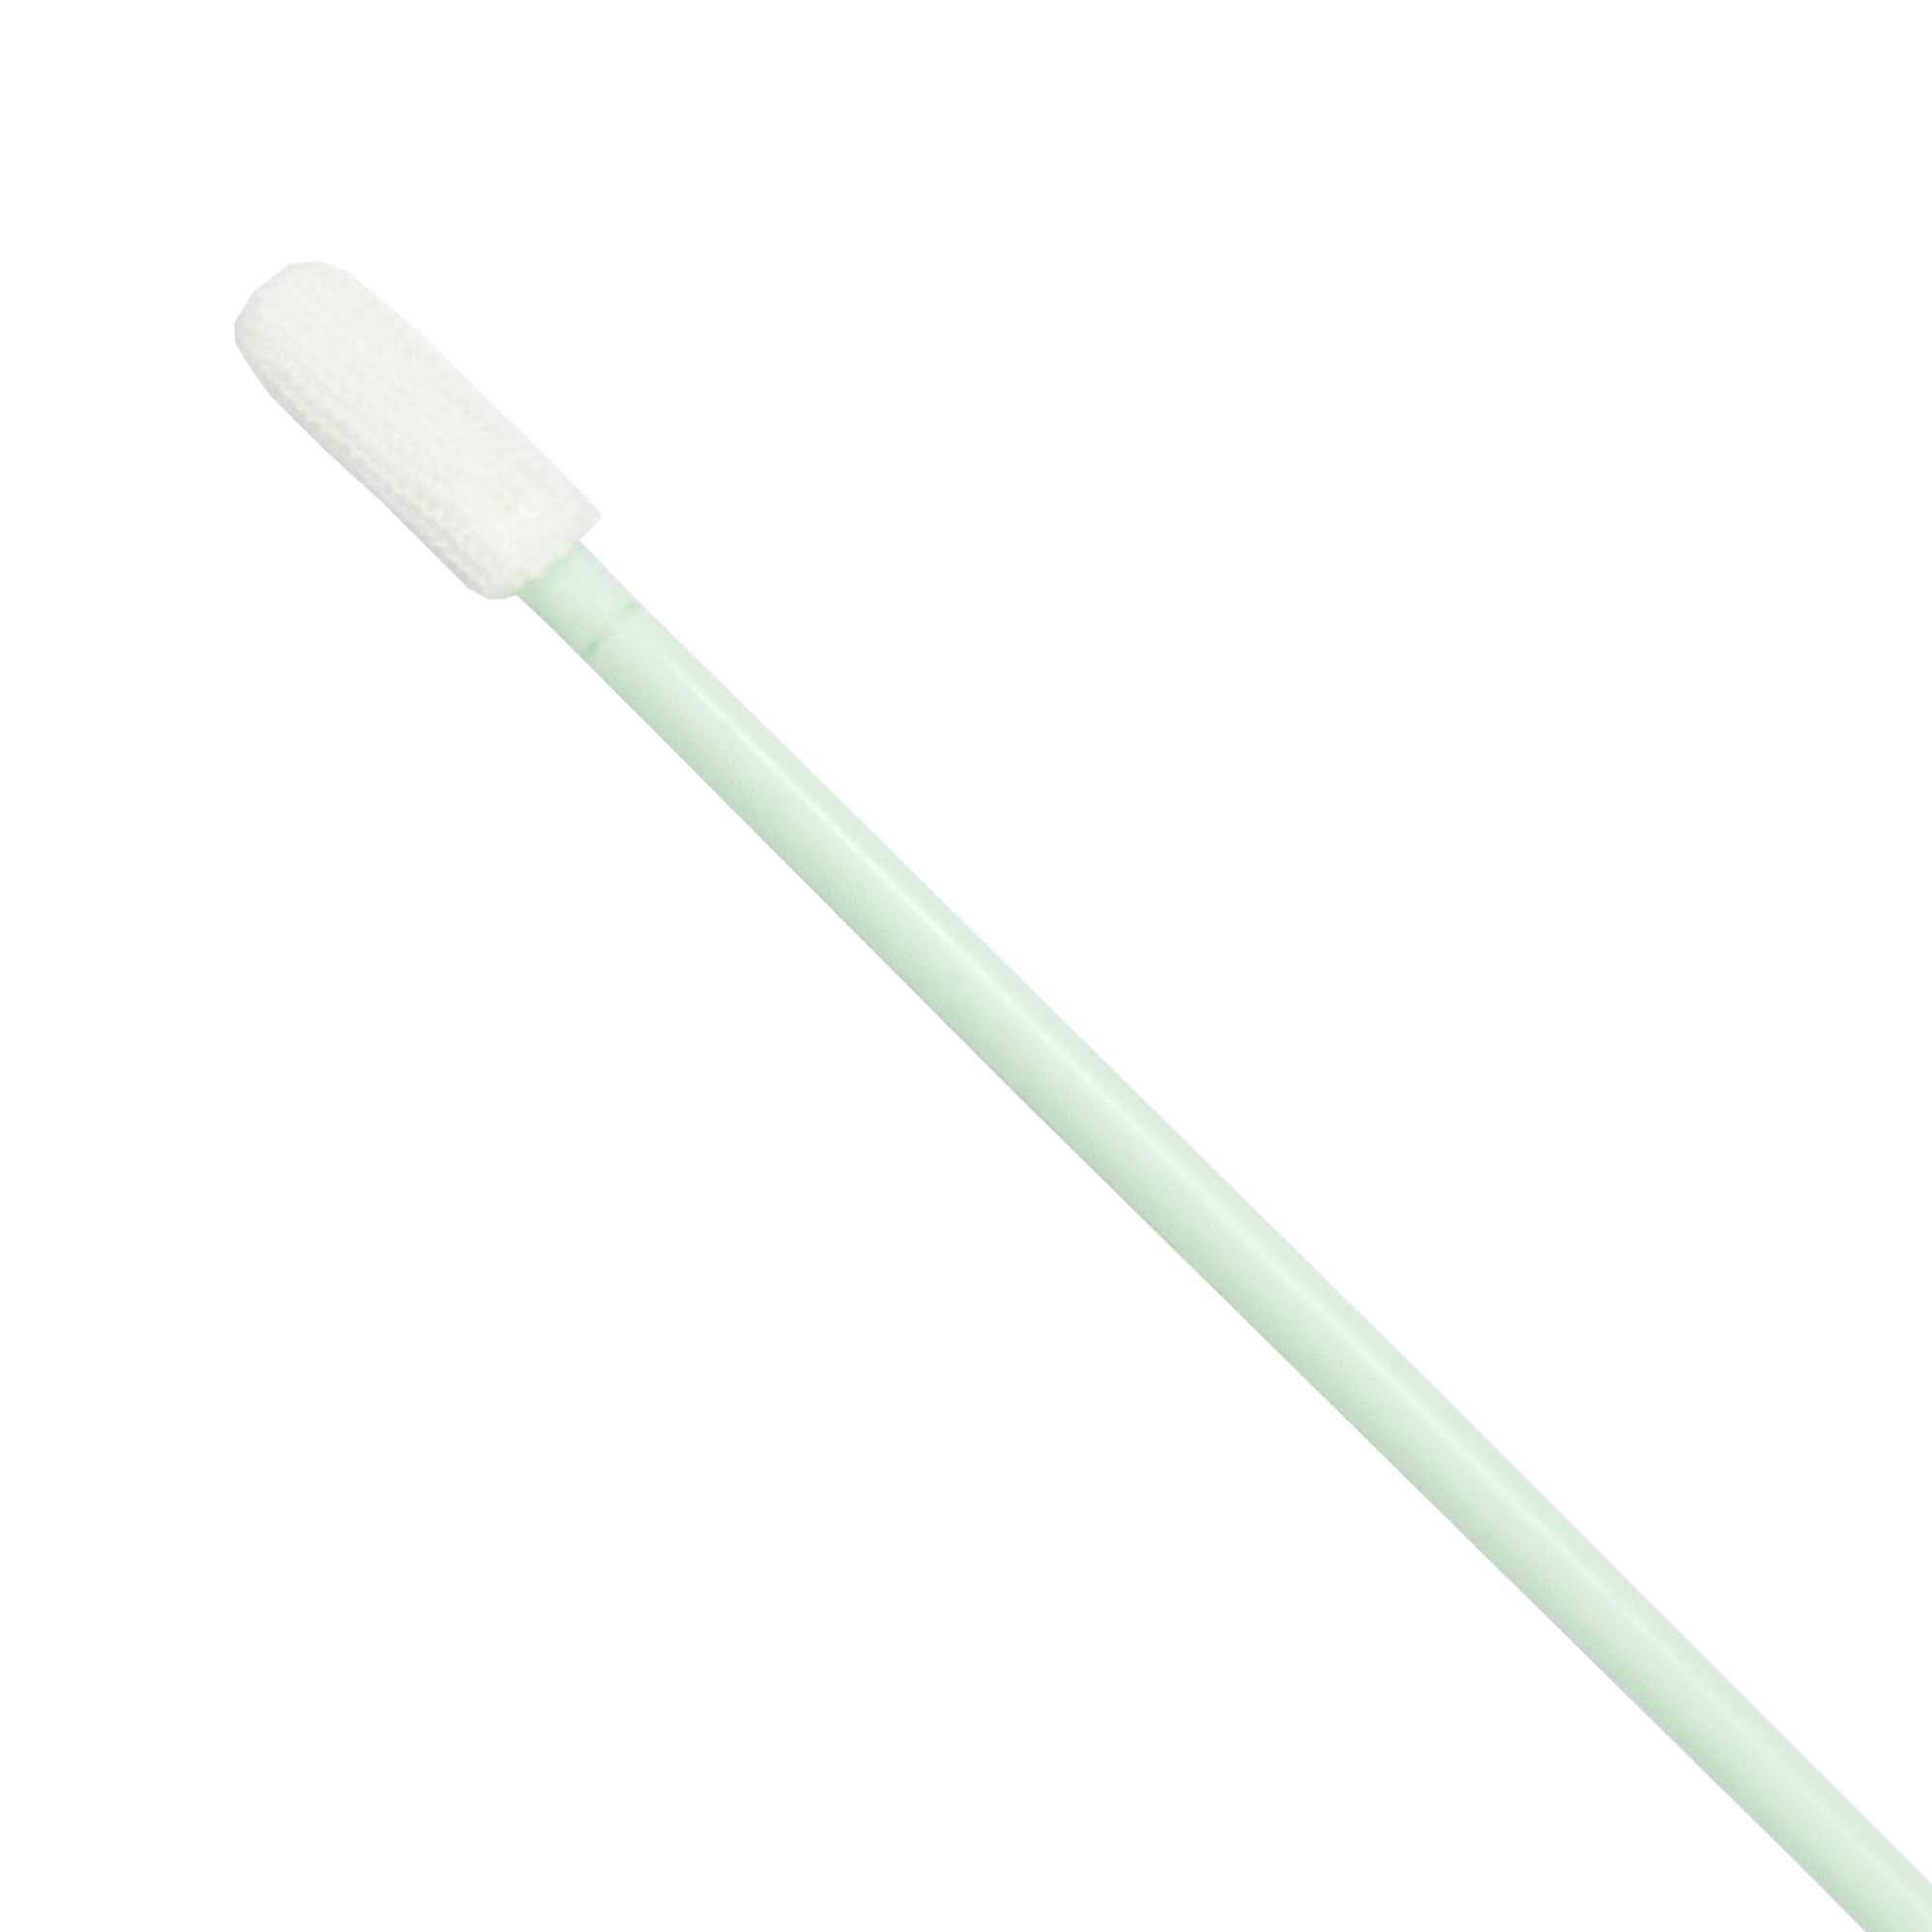 Cleaning Stick/Swab PS3912